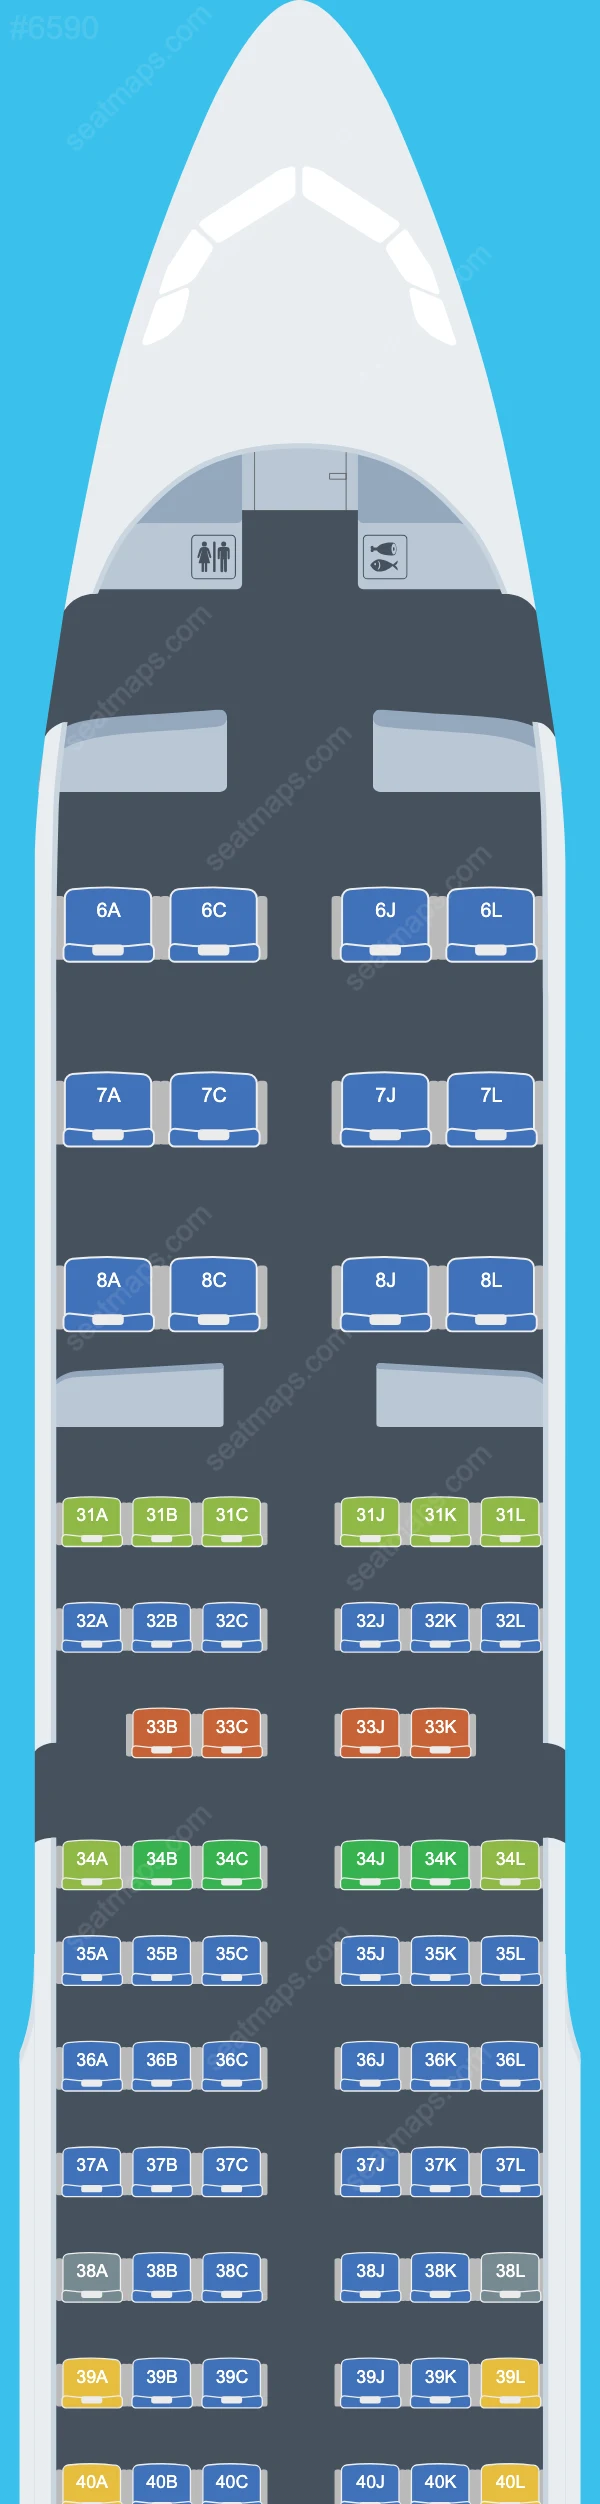 China Eastern Airbus A321-200 V.3 seatmap preview